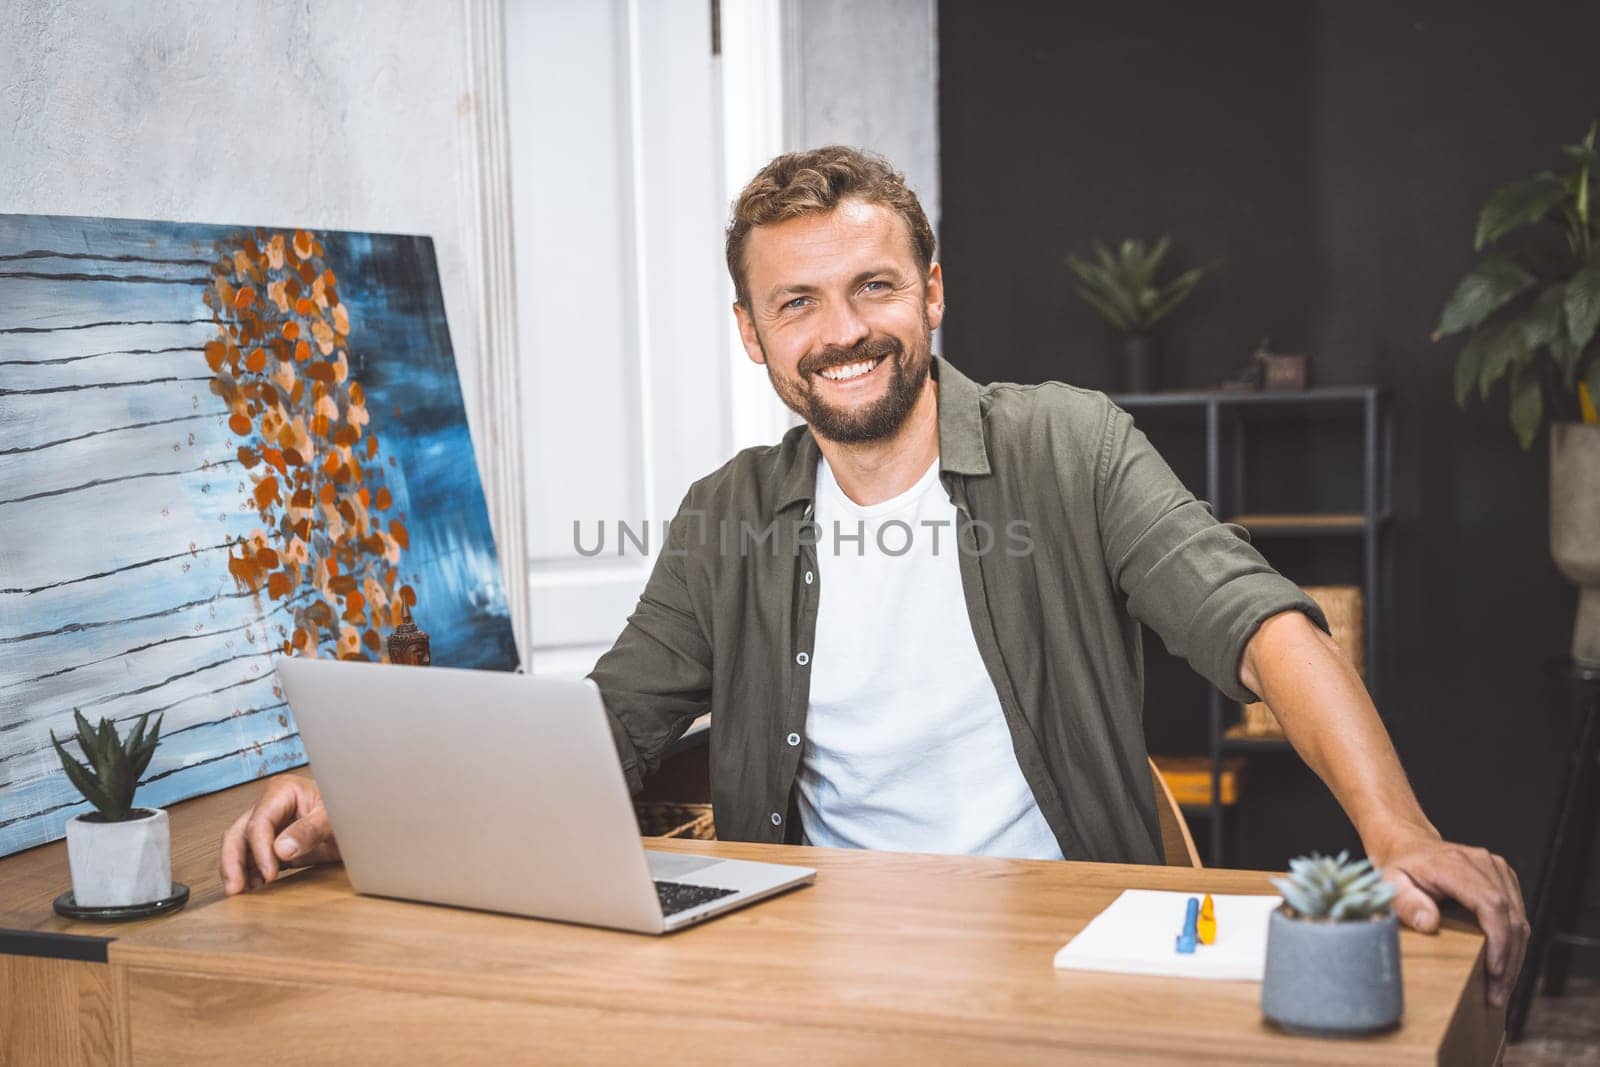 Concept of remote work, freelance, and productivity in digital age. Cheerful and productive man, works from home, He smiling, focusing on his work, surrounded by digital technology and equipment. by LipikStockMedia